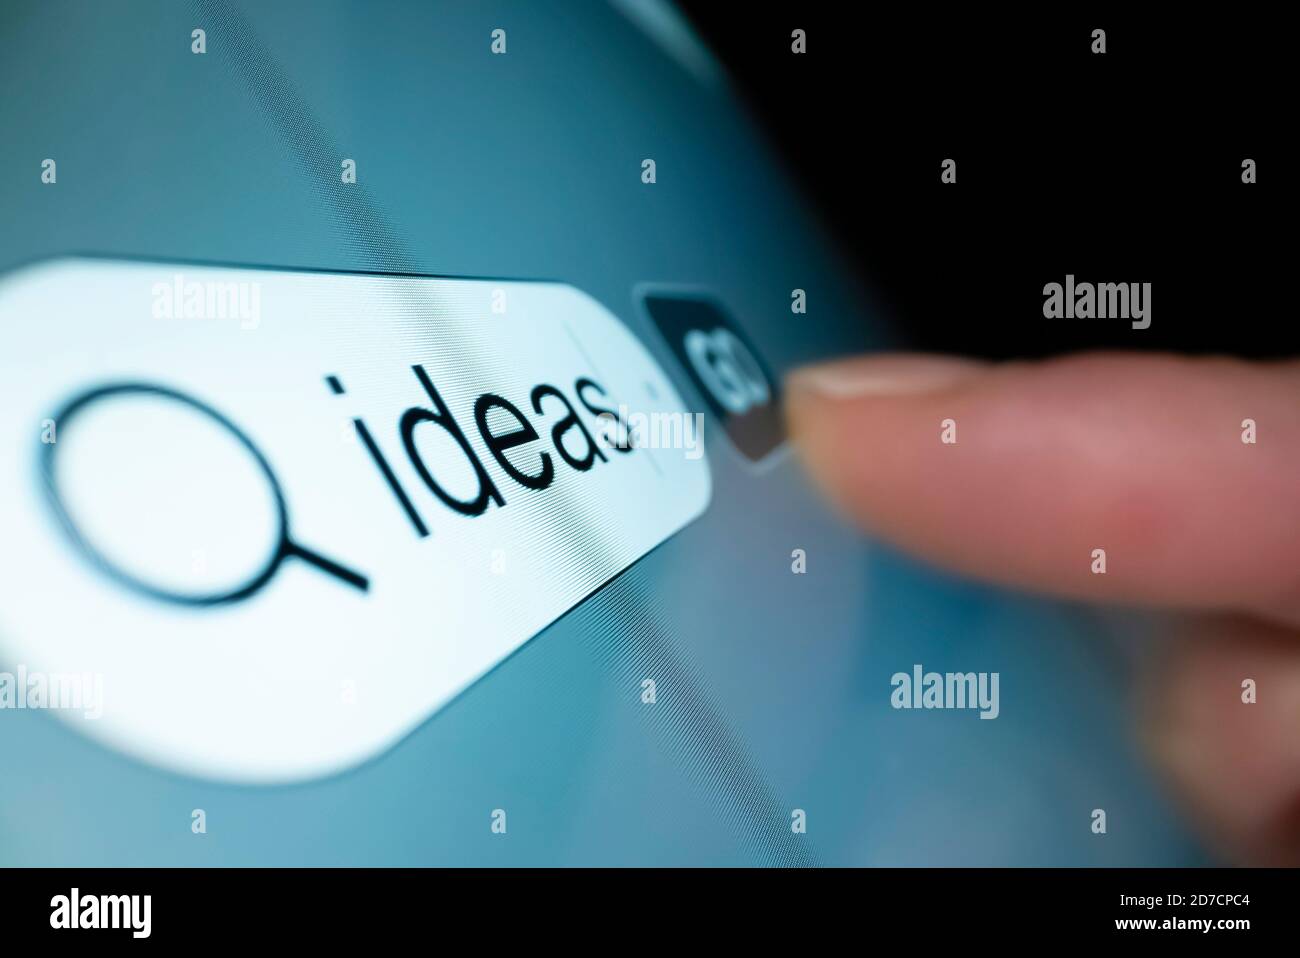 Searching for ideas on the Internet Stock Photo